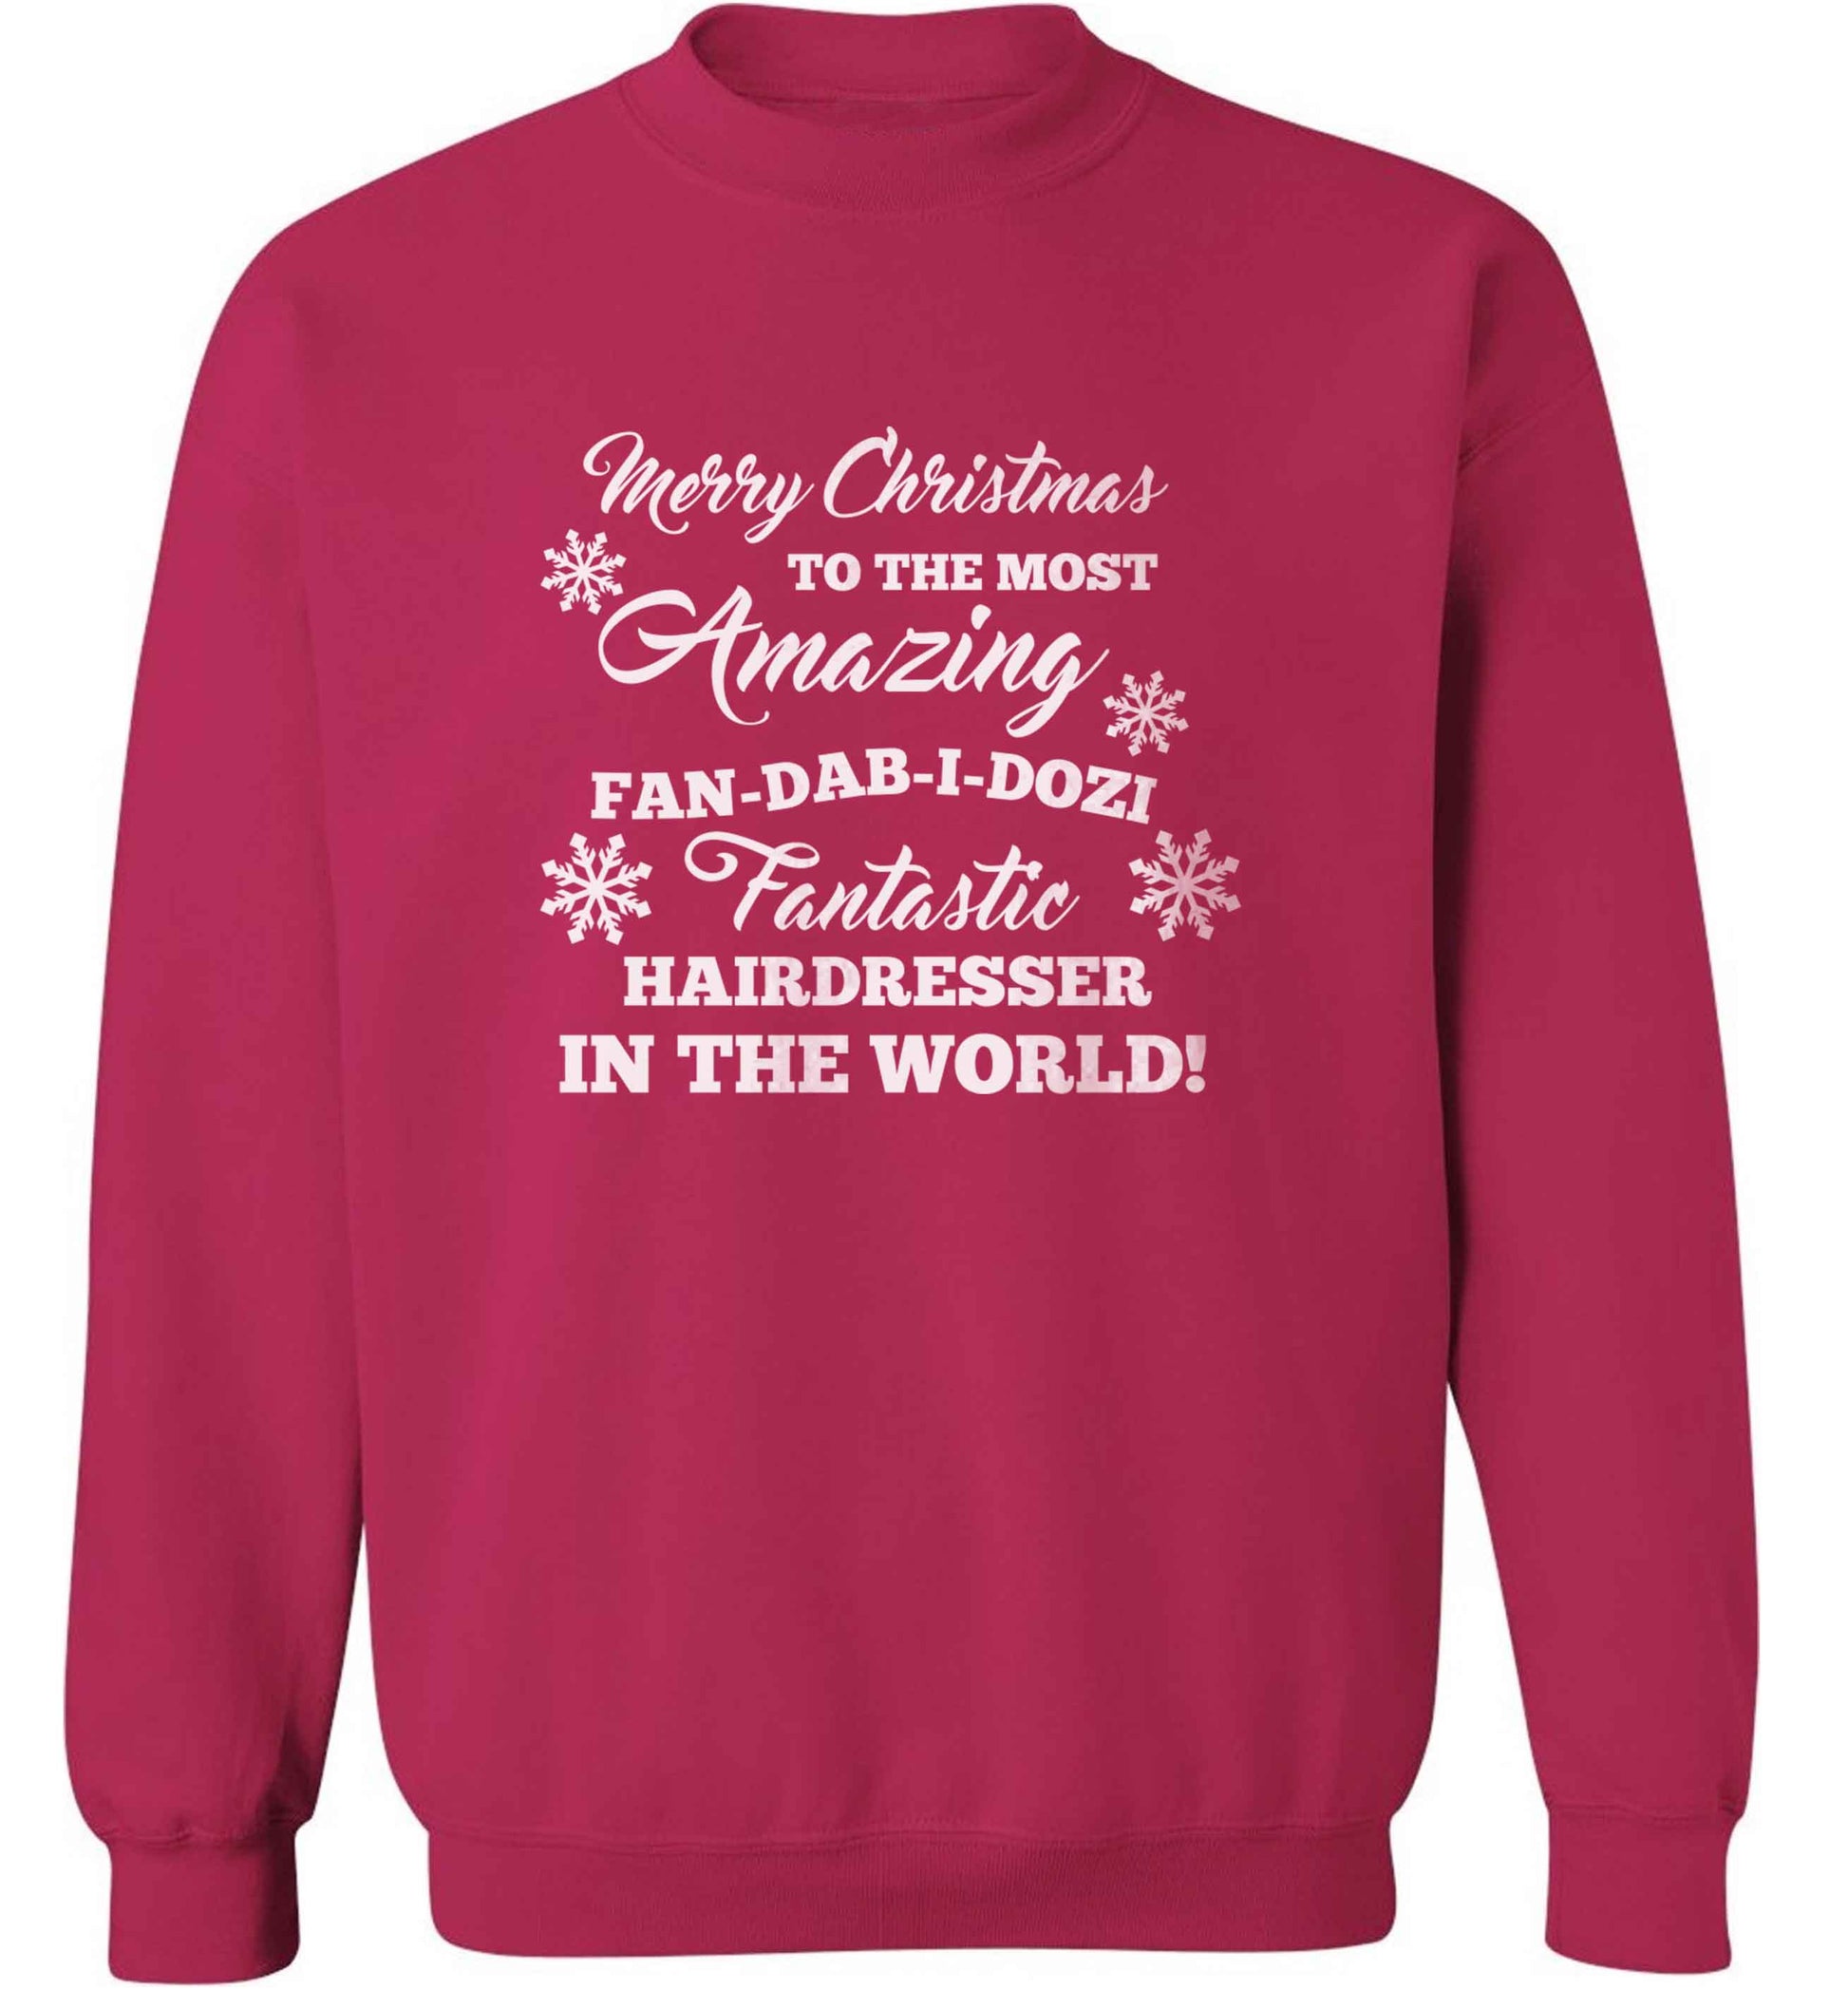 Merry Christmas to the most amazing dental assistant in the world! adult's unisex pink sweater 2XL